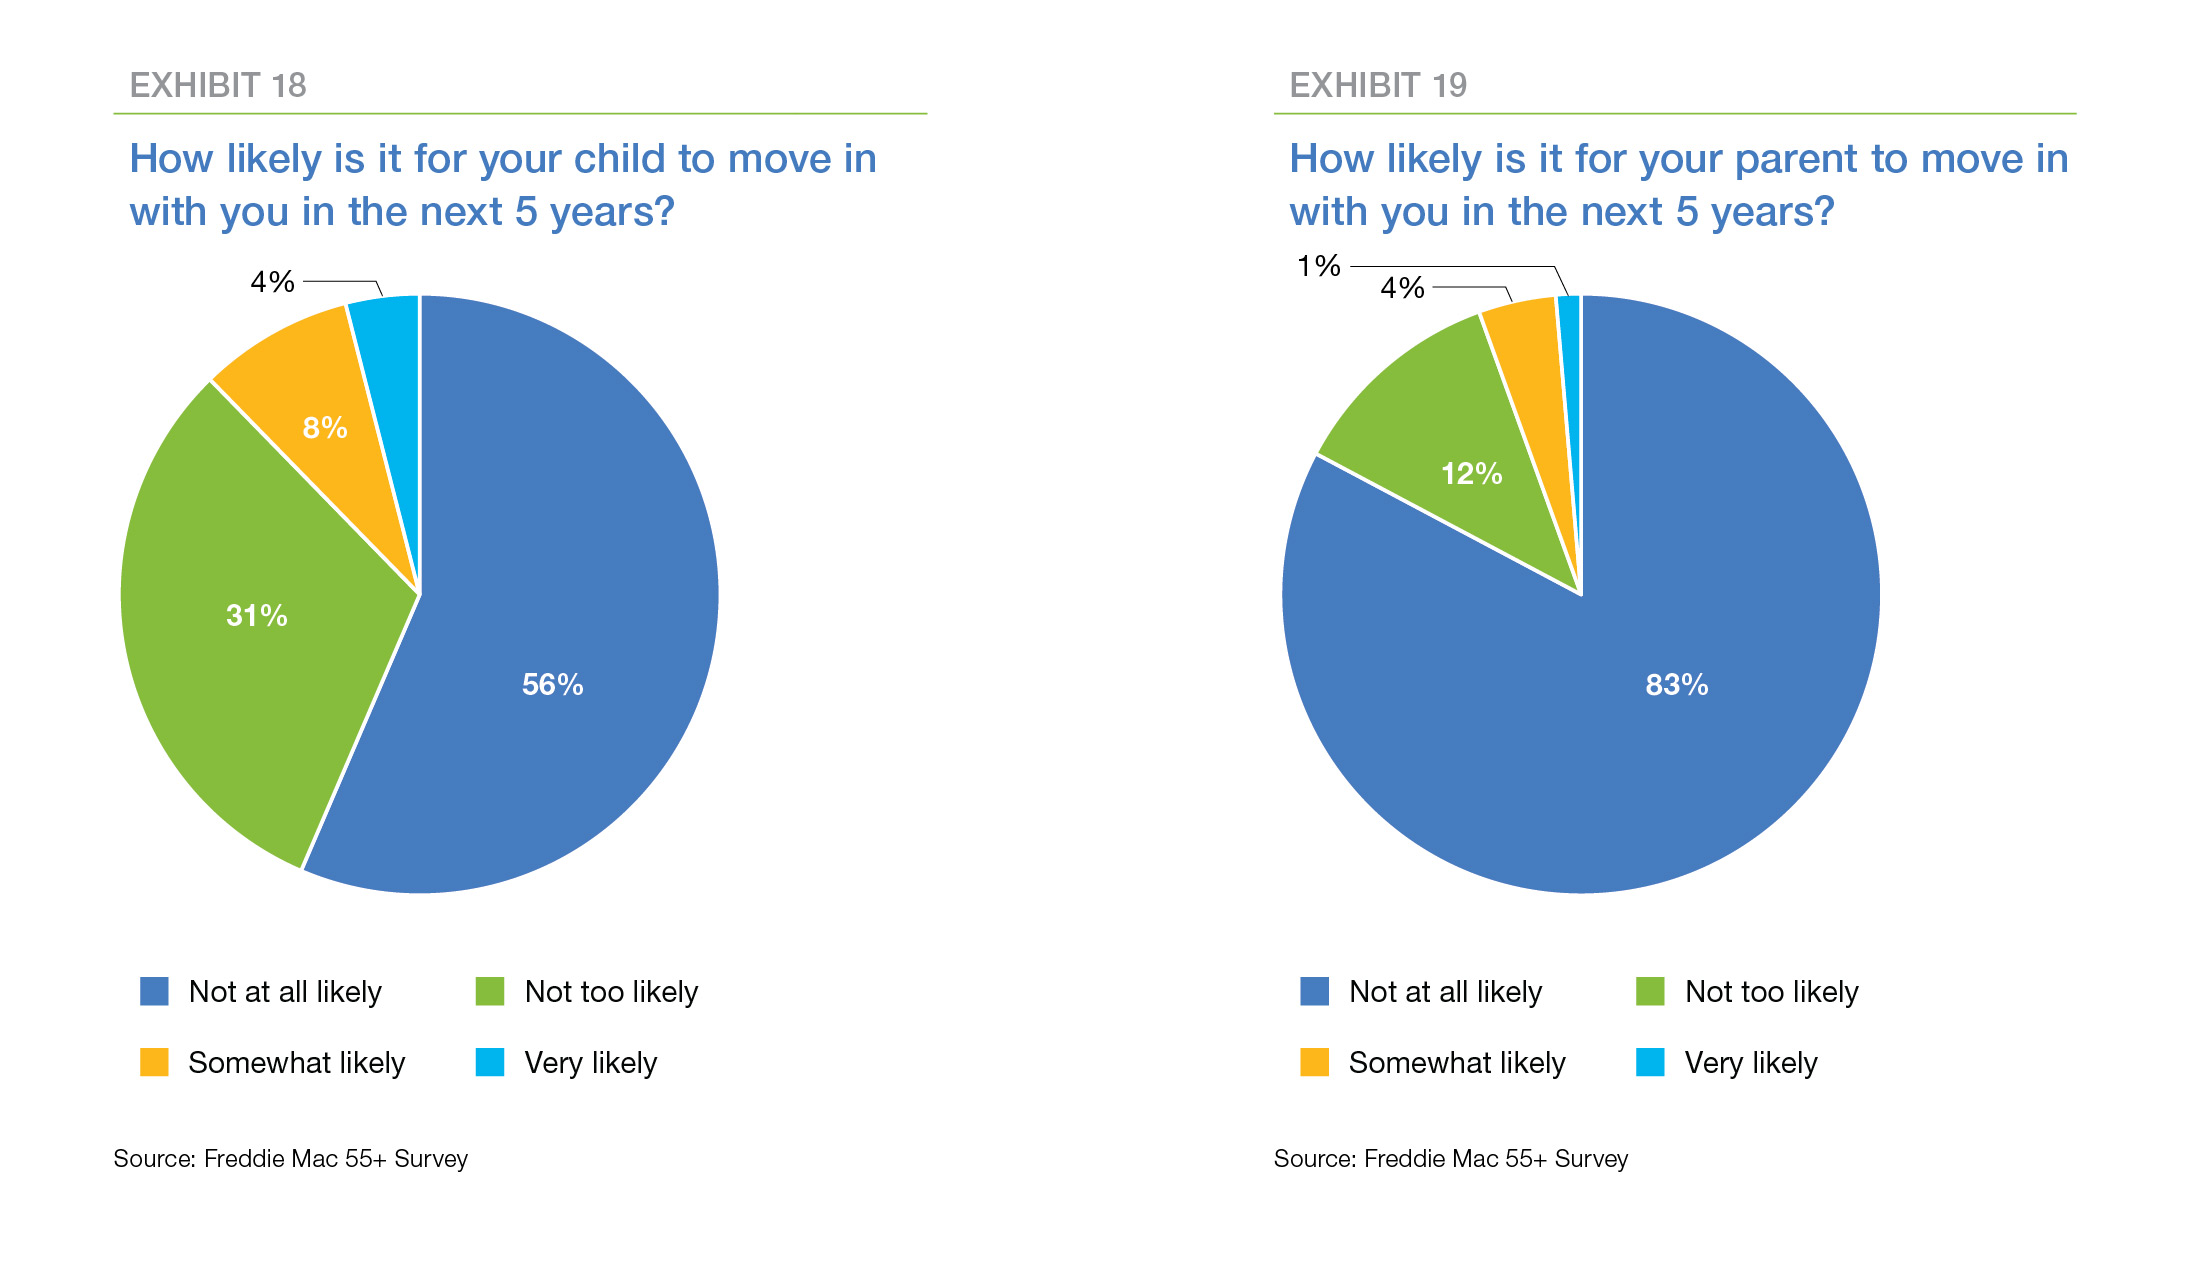 Exhibit 18 and 19: 'How likely is it for your child to move in with you in the next 5 years?' and 'How likely is it for your parent to move with you in the next 5 years?'